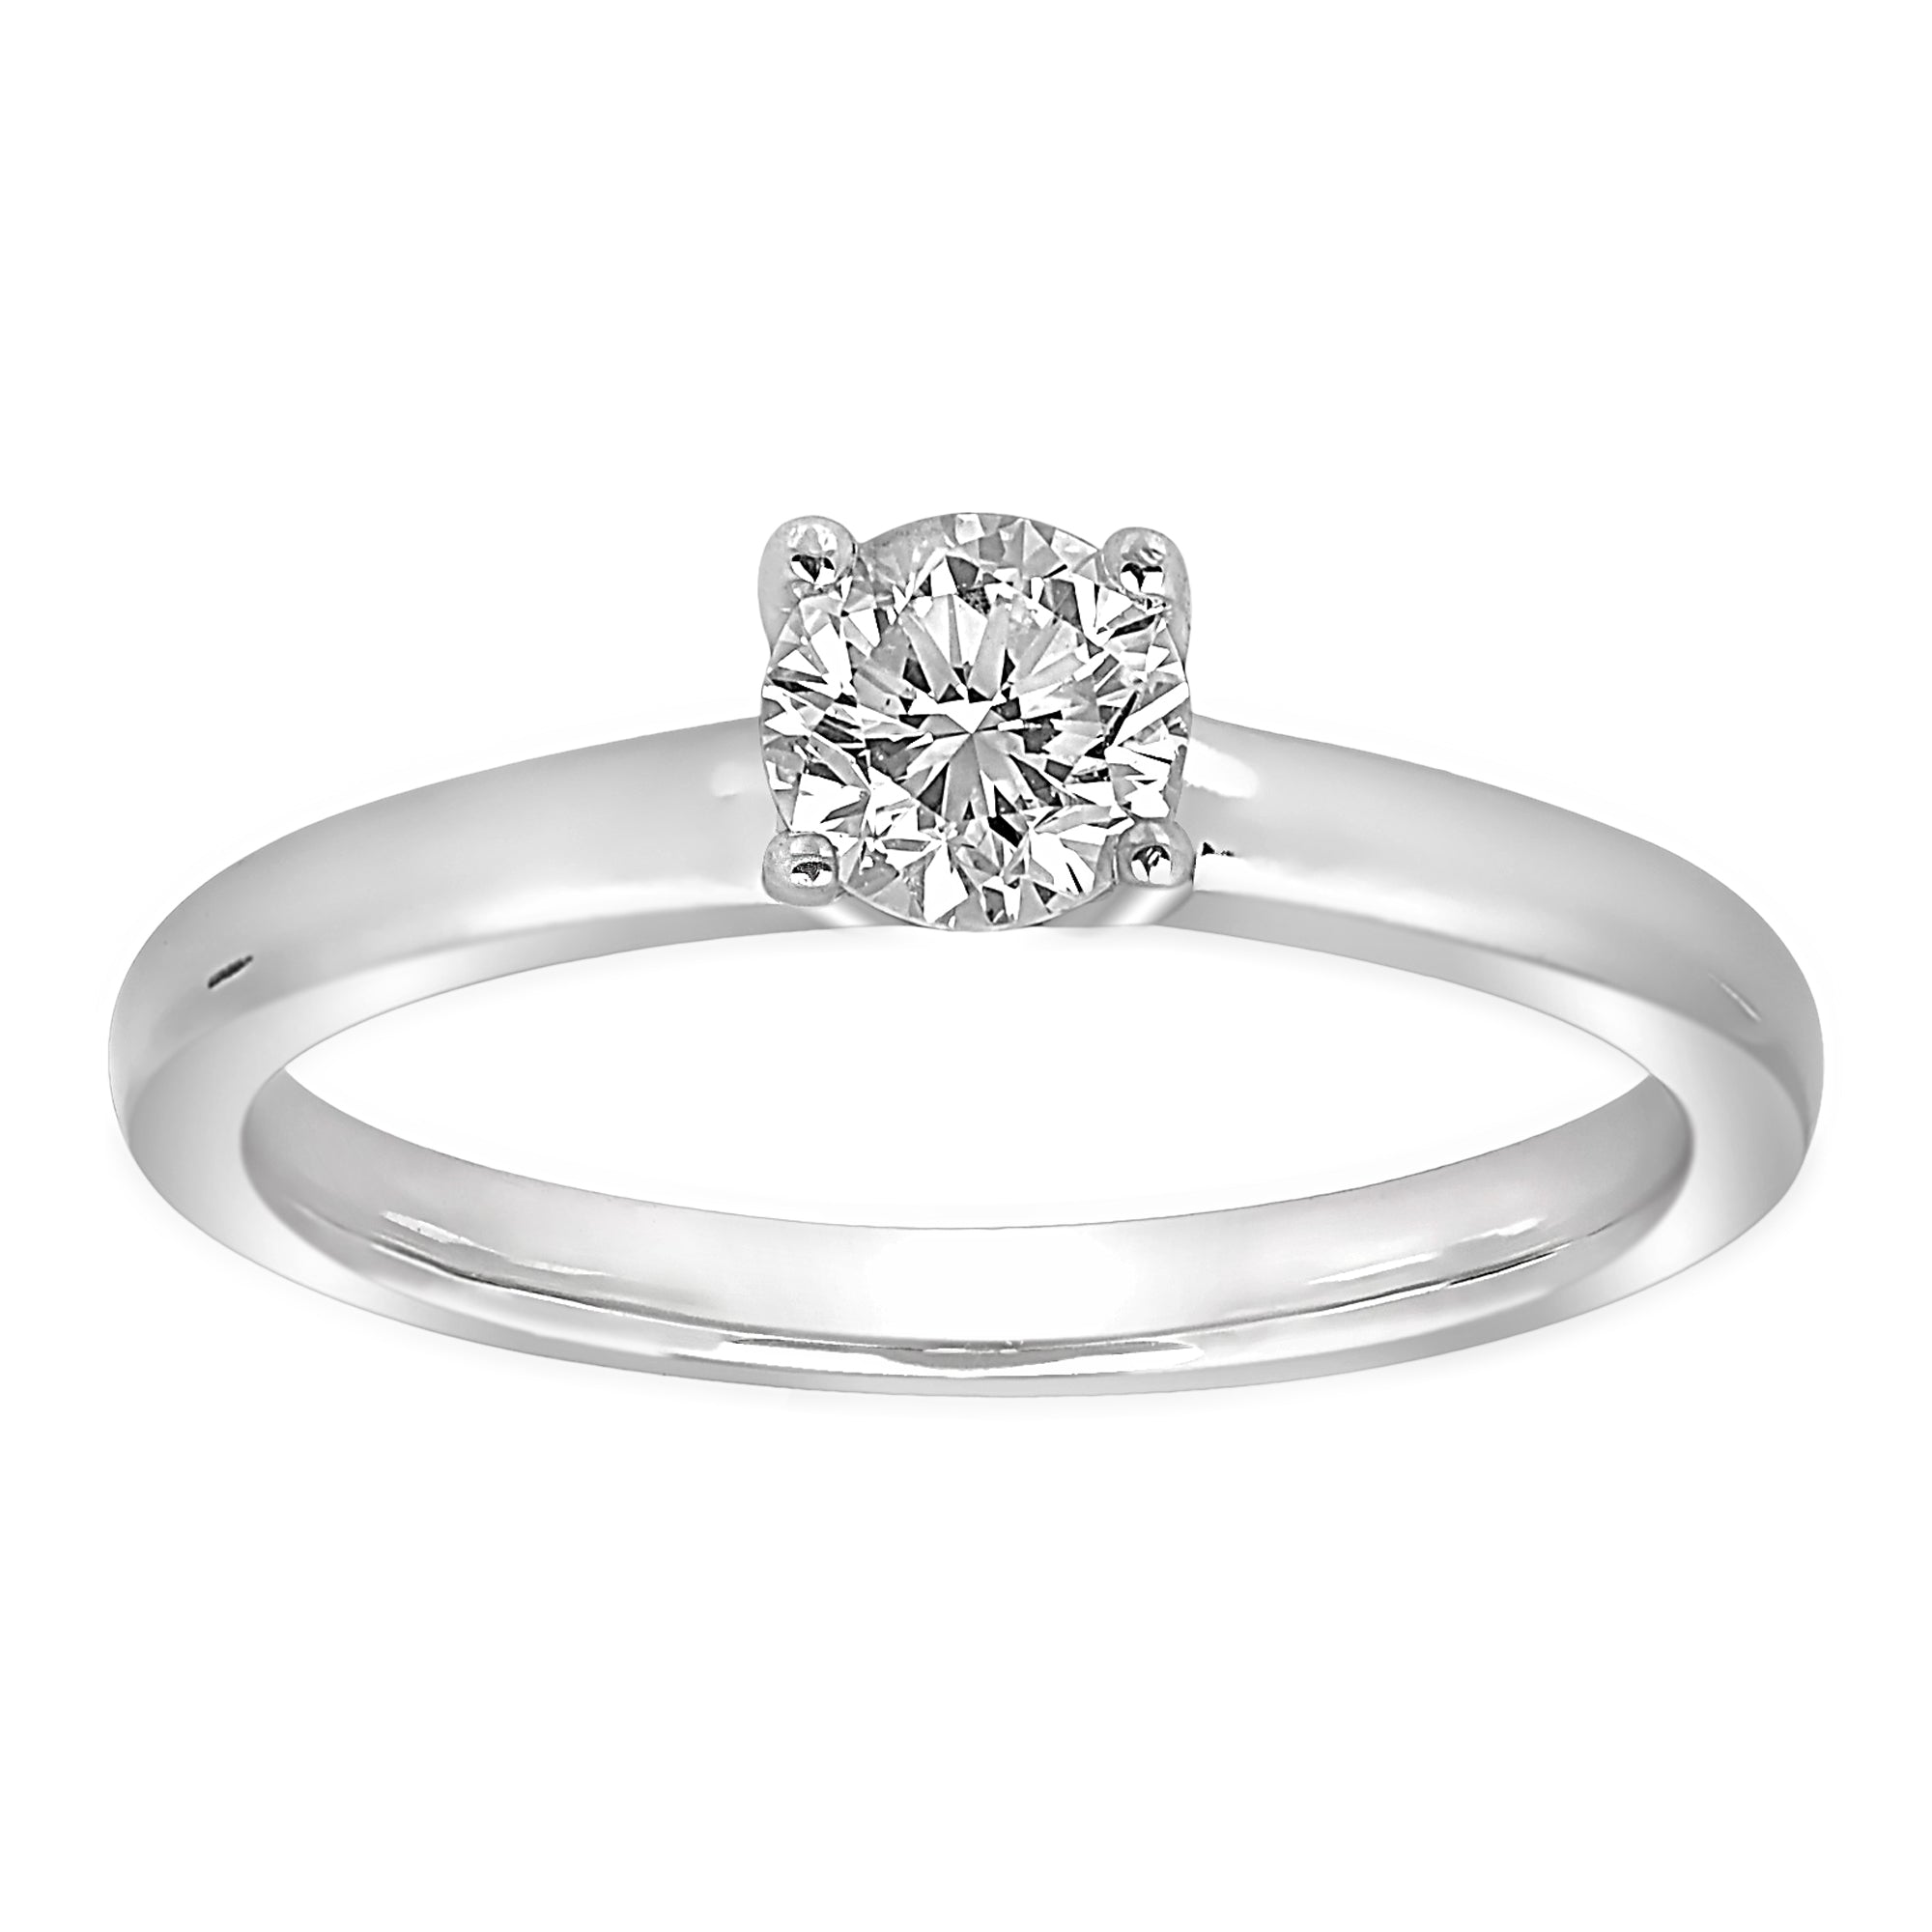 Sterling Silver Cubic Zirconia 0.75ct Ring - AK1004 - Hallmark Jewellers Formby & The Jewellers Bench Widnes